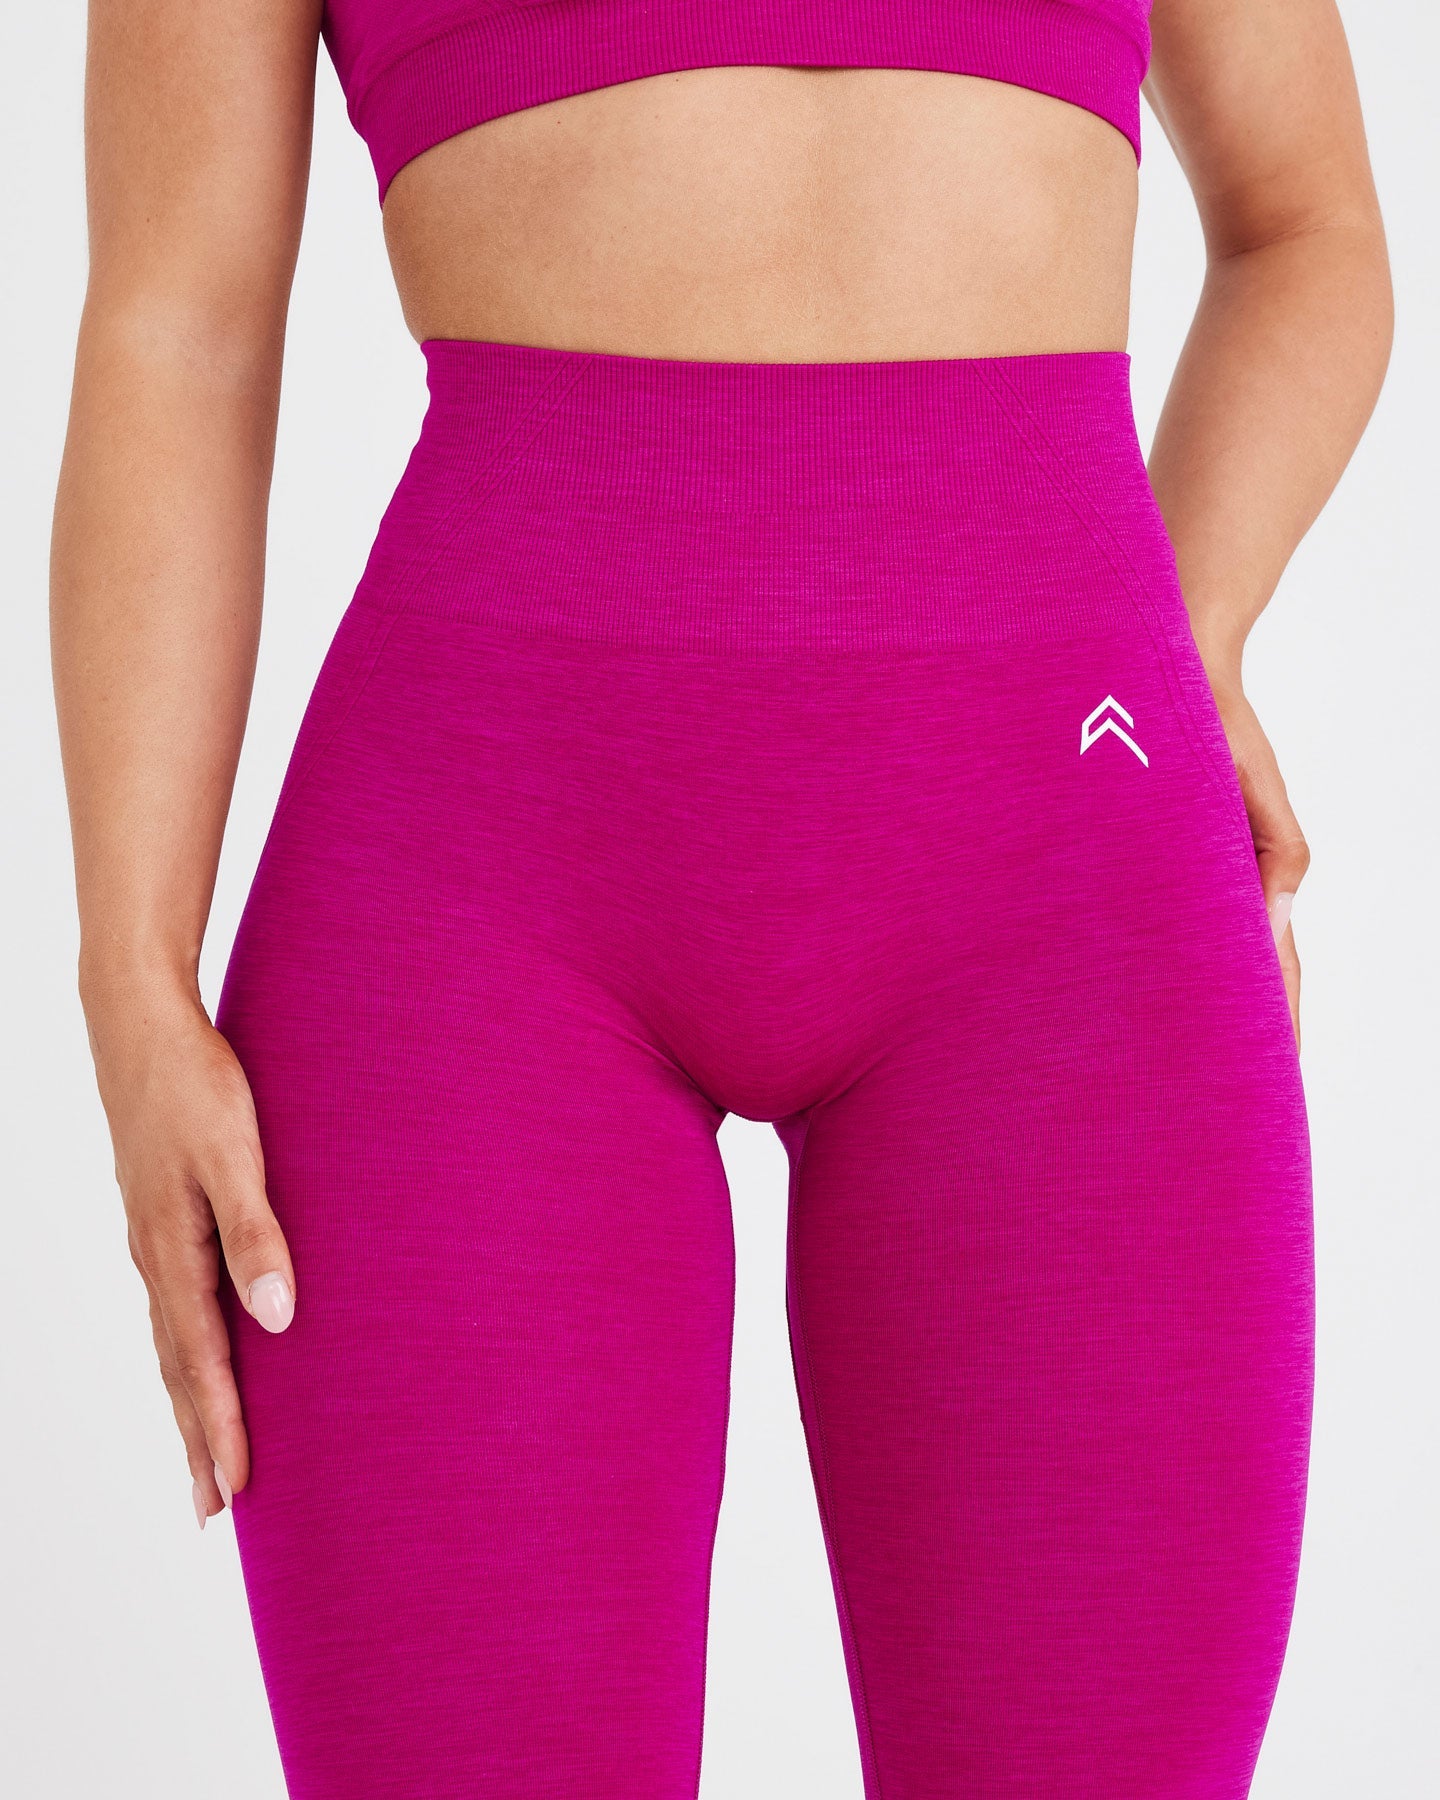 Fusipu High Waist Tummy Control Seamless Women Safety Pants Double-Layer  Safety Pants with Crotch Cover Female Clothes 